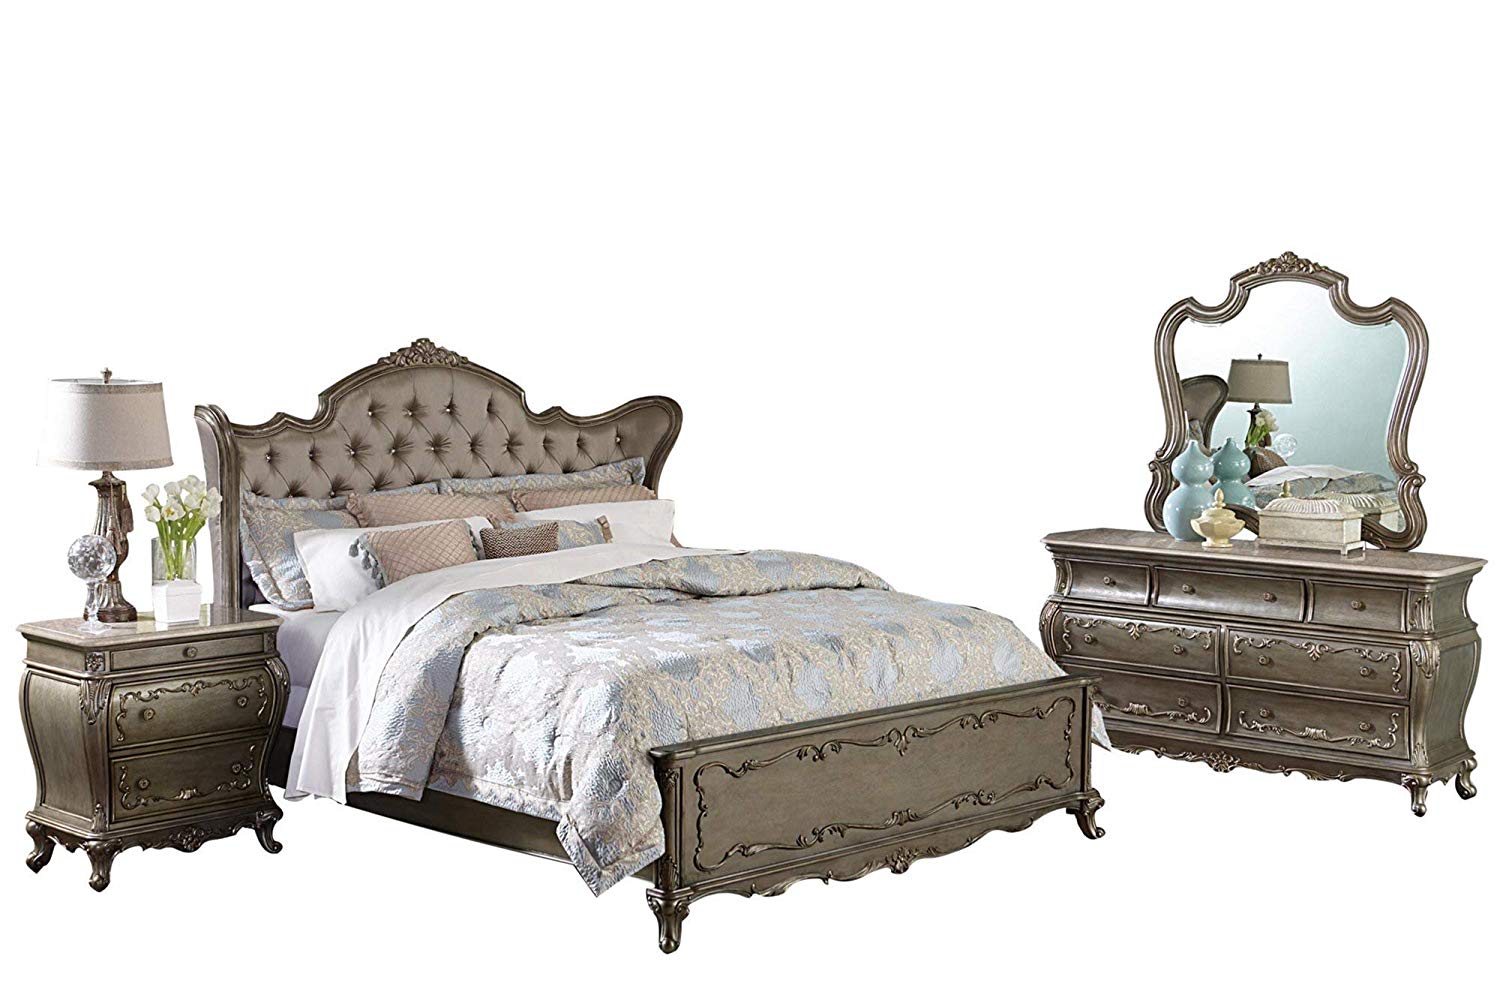 4PC Master Bedroom Set by Fenti Old World European